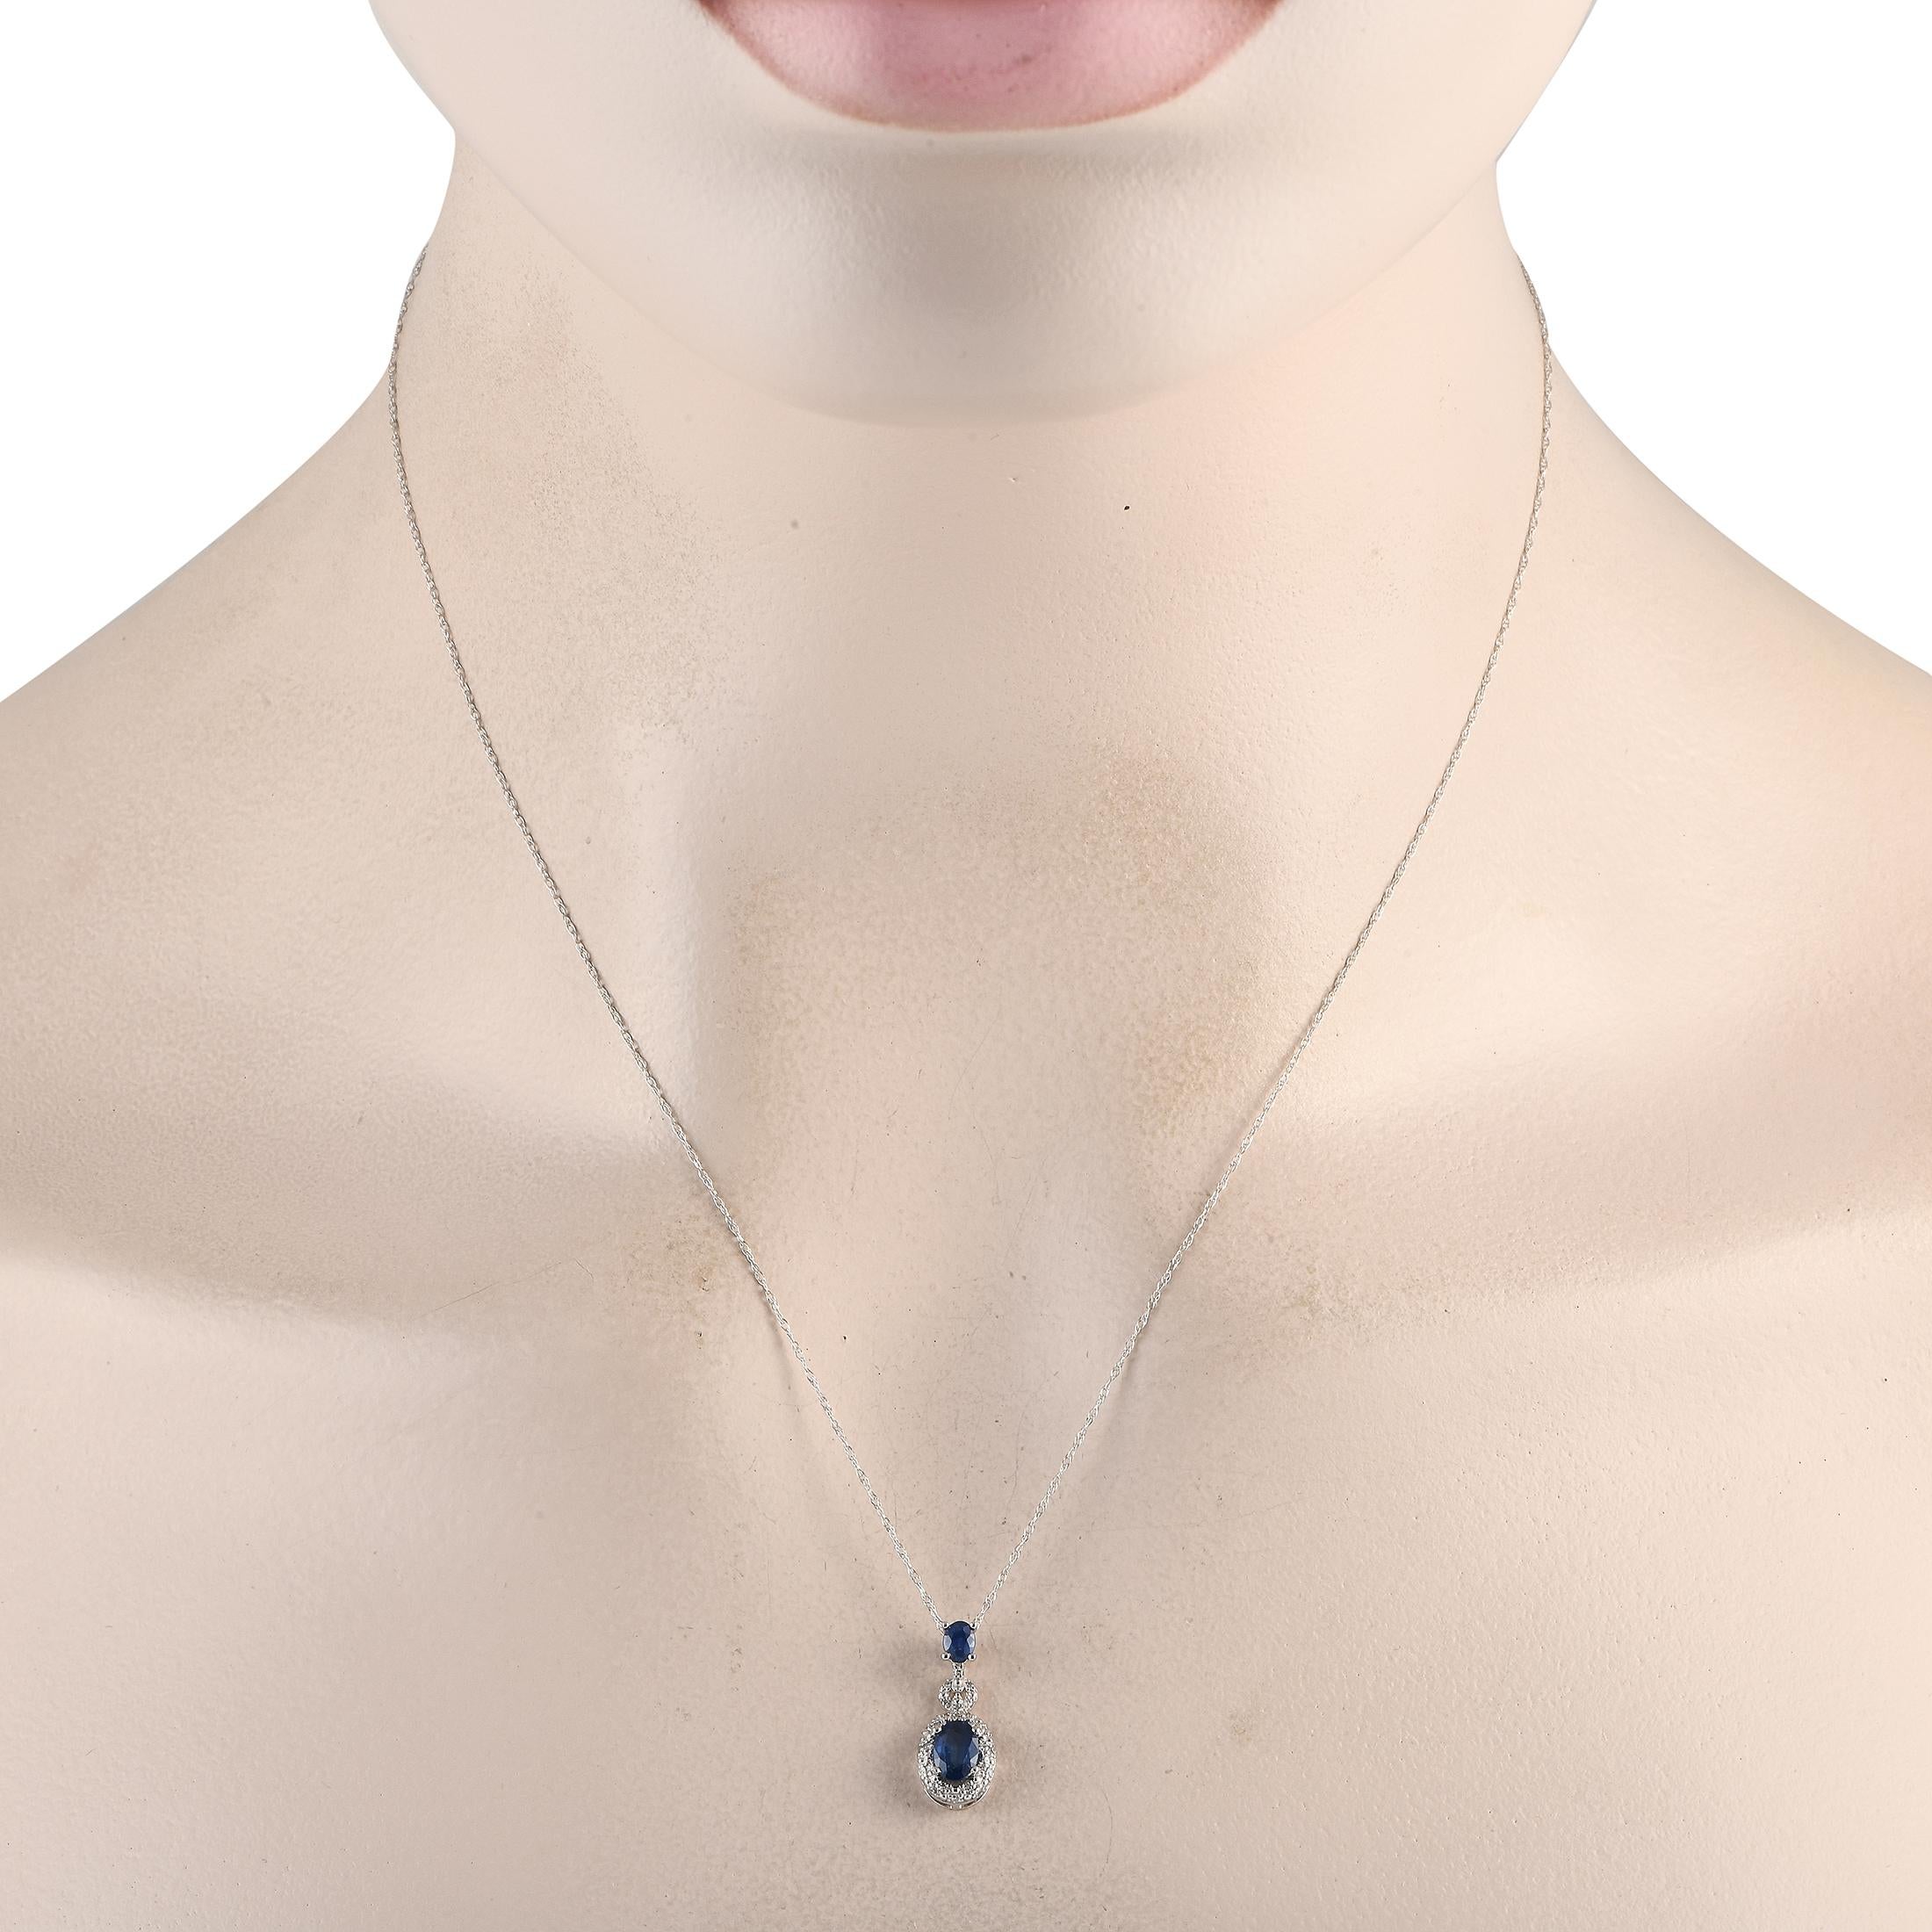 A pair of deep blue sapphire gemstones add a pop of color to this impressive luxury necklace. Simple and understated in design, this elegant accessory features an intricate 14K white gold pendant measuring 0.75 long by 0.25 wide suspended from an 18